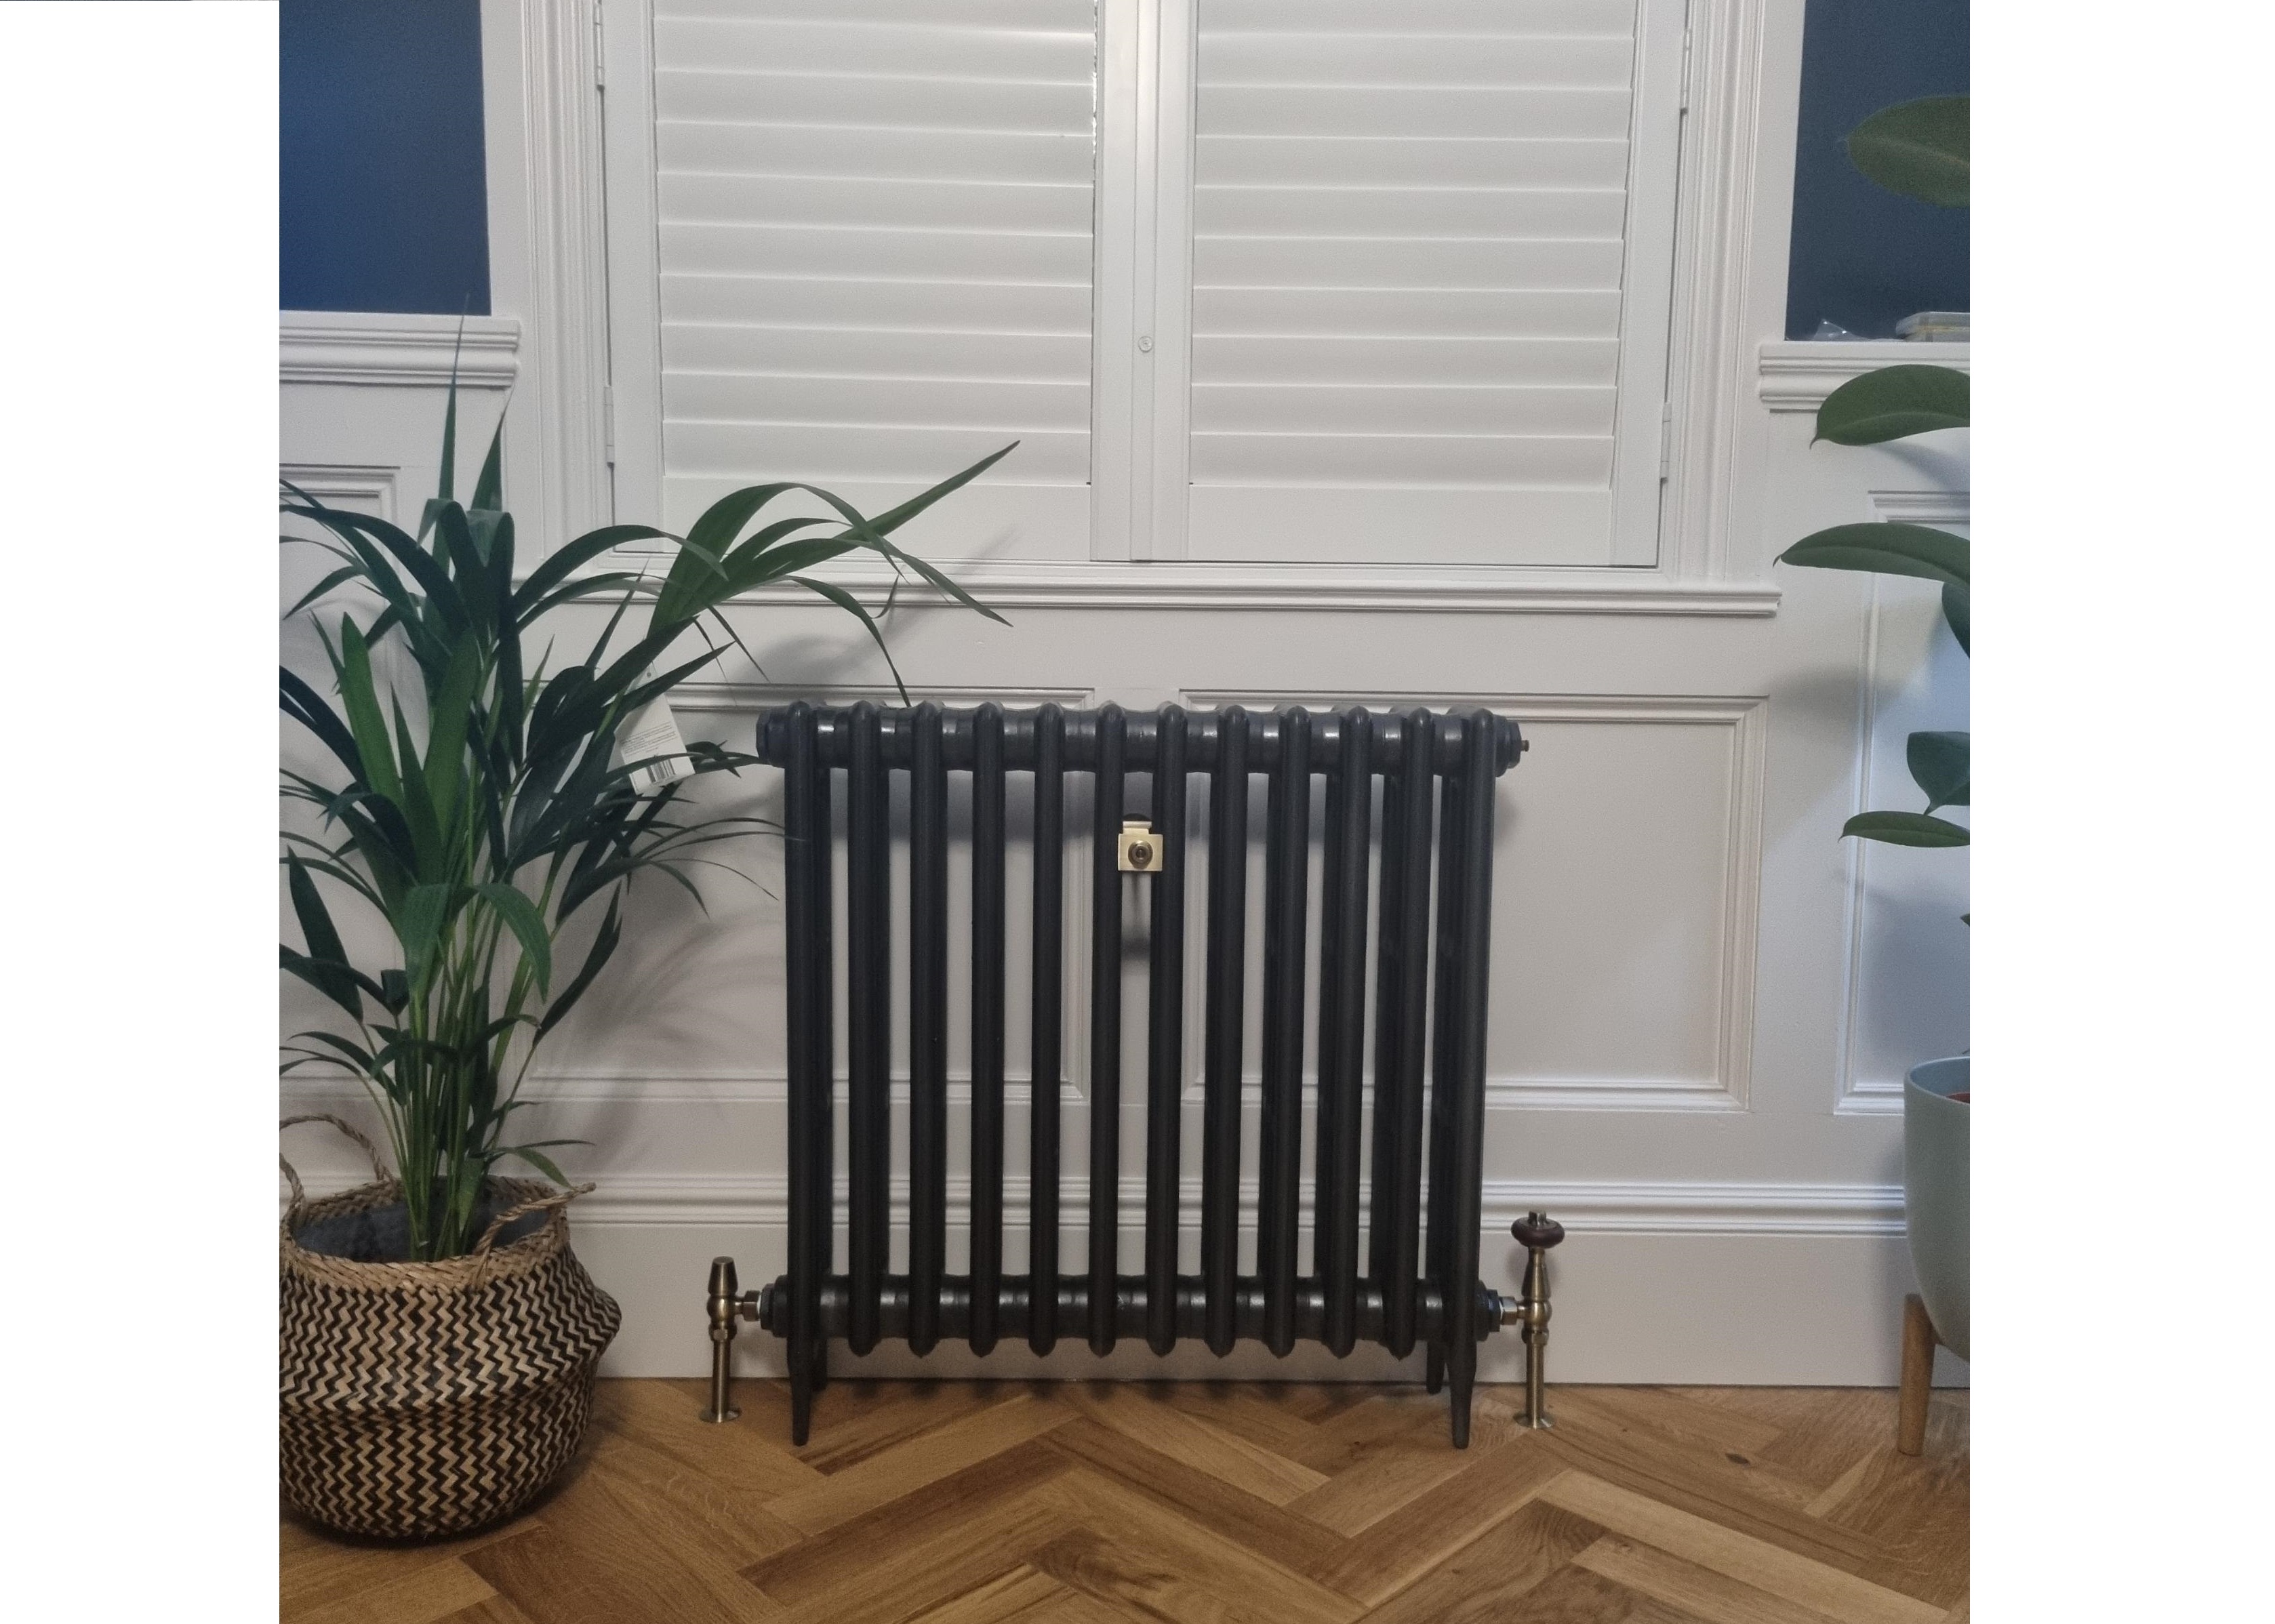 Carron Cast Iron Radiator Suitable For Large Victorian Rooms